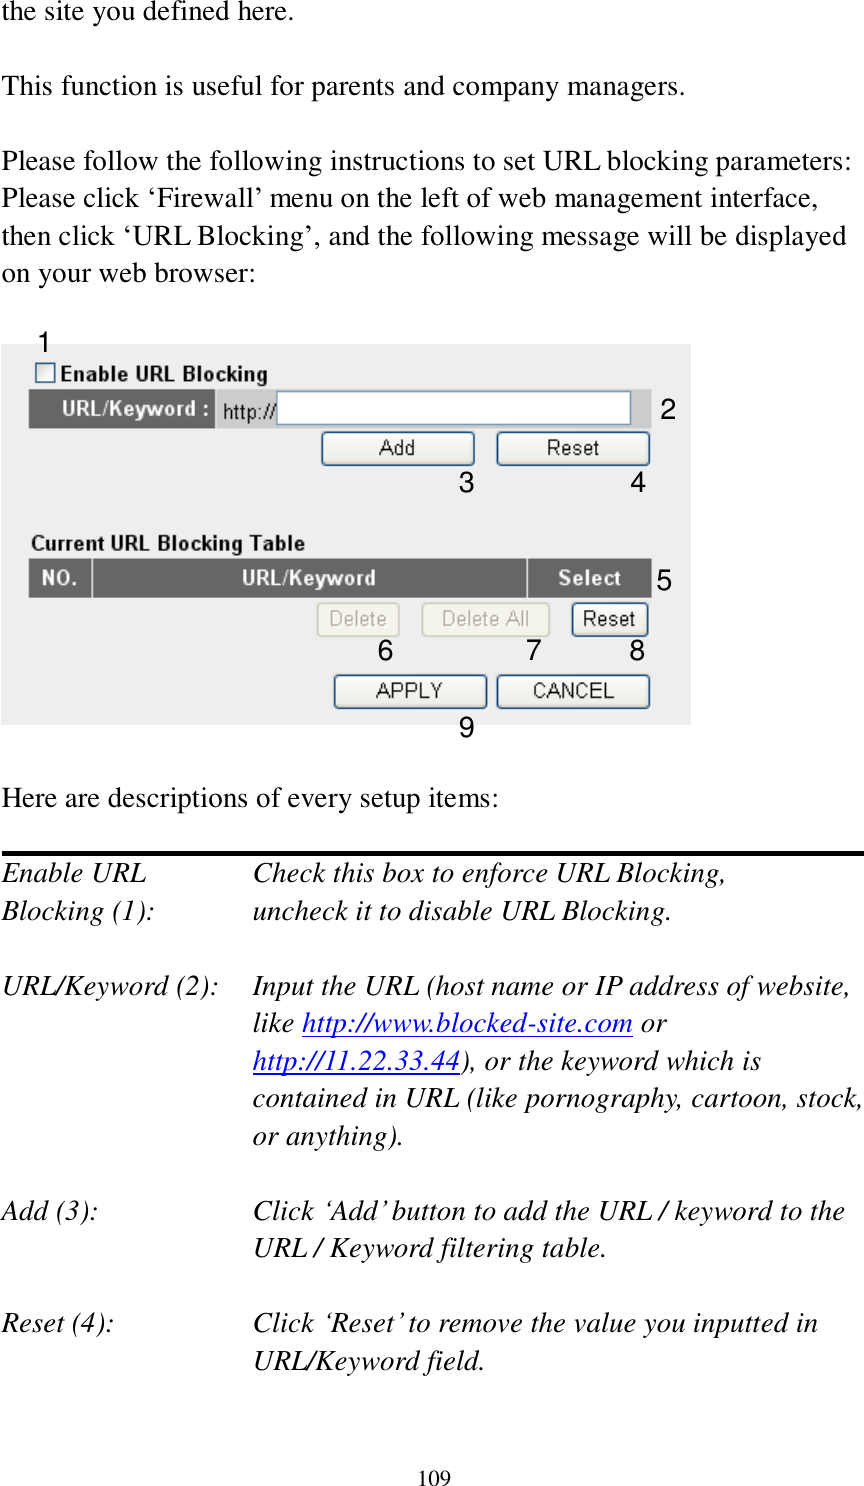 109 the site you defined here.  This function is useful for parents and company managers.  Please follow the following instructions to set URL blocking parameters: Please click „Firewall‟ menu on the left of web management interface, then click „URL Blocking‟, and the following message will be displayed on your web browser:    Here are descriptions of every setup items:  Enable URL      Check this box to enforce URL Blocking, Blocking (1):      uncheck it to disable URL Blocking.  URL/Keyword (2):    Input the URL (host name or IP address of website, like http://www.blocked-site.com or http://11.22.33.44), or the keyword which is contained in URL (like pornography, cartoon, stock, or anything).  Add (3):    Click „Add‟ button to add the URL / keyword to the URL / Keyword filtering table.  Reset (4):    Click „Reset‟ to remove the value you inputted in URL/Keyword field.  2 3 4 5 6 7 8 9 1 